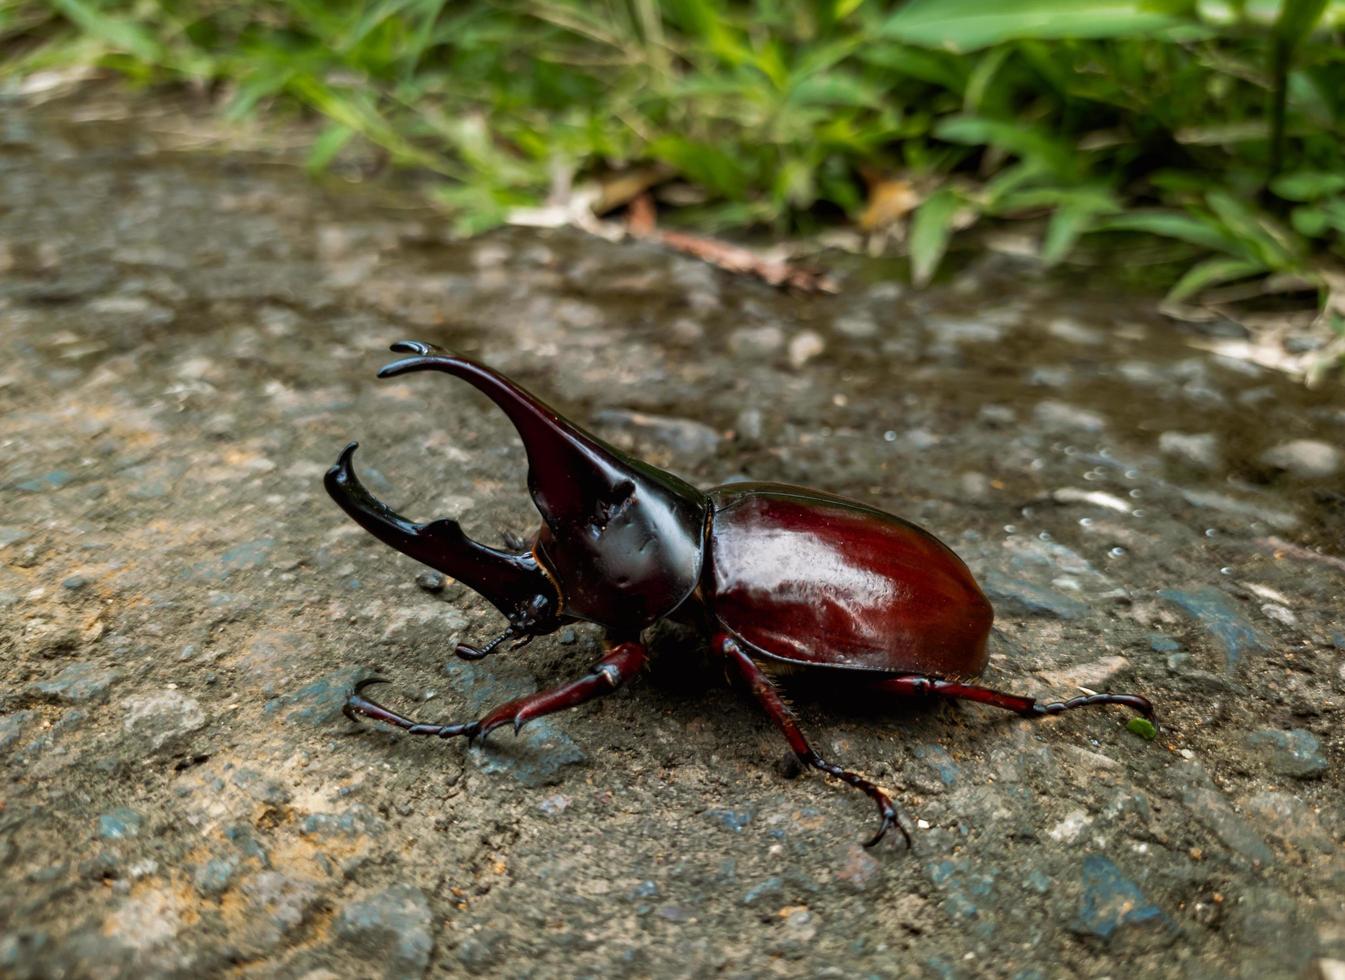 close up photo of rhinoceros beetle with scientific name Xylotrupes gideon with two horns, japanese rhinoceros beetle, insect